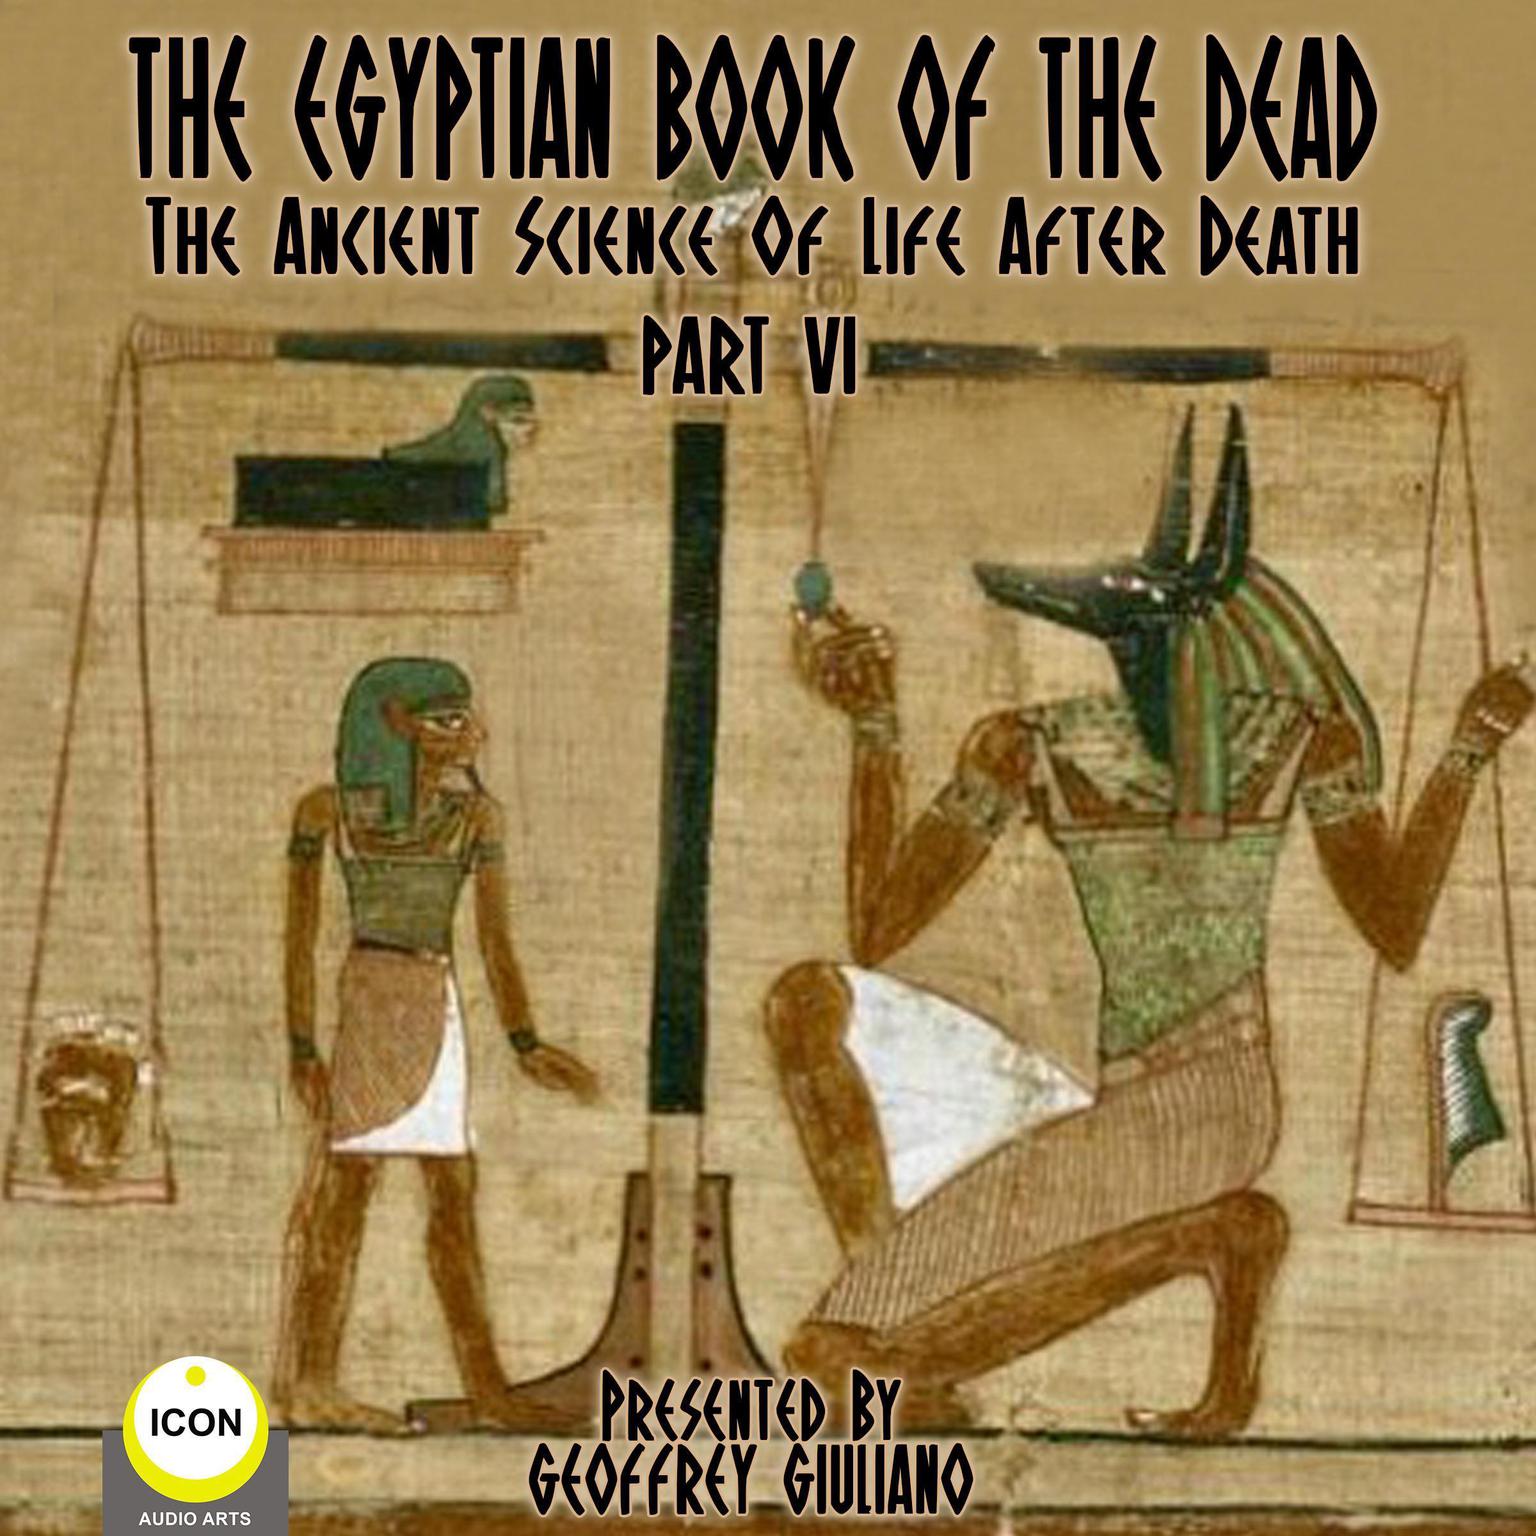 The Egyptian Book Of The Dead - The Ancient Science Of Life After Death - Part 6 (Abridged) Audiobook, by unknown